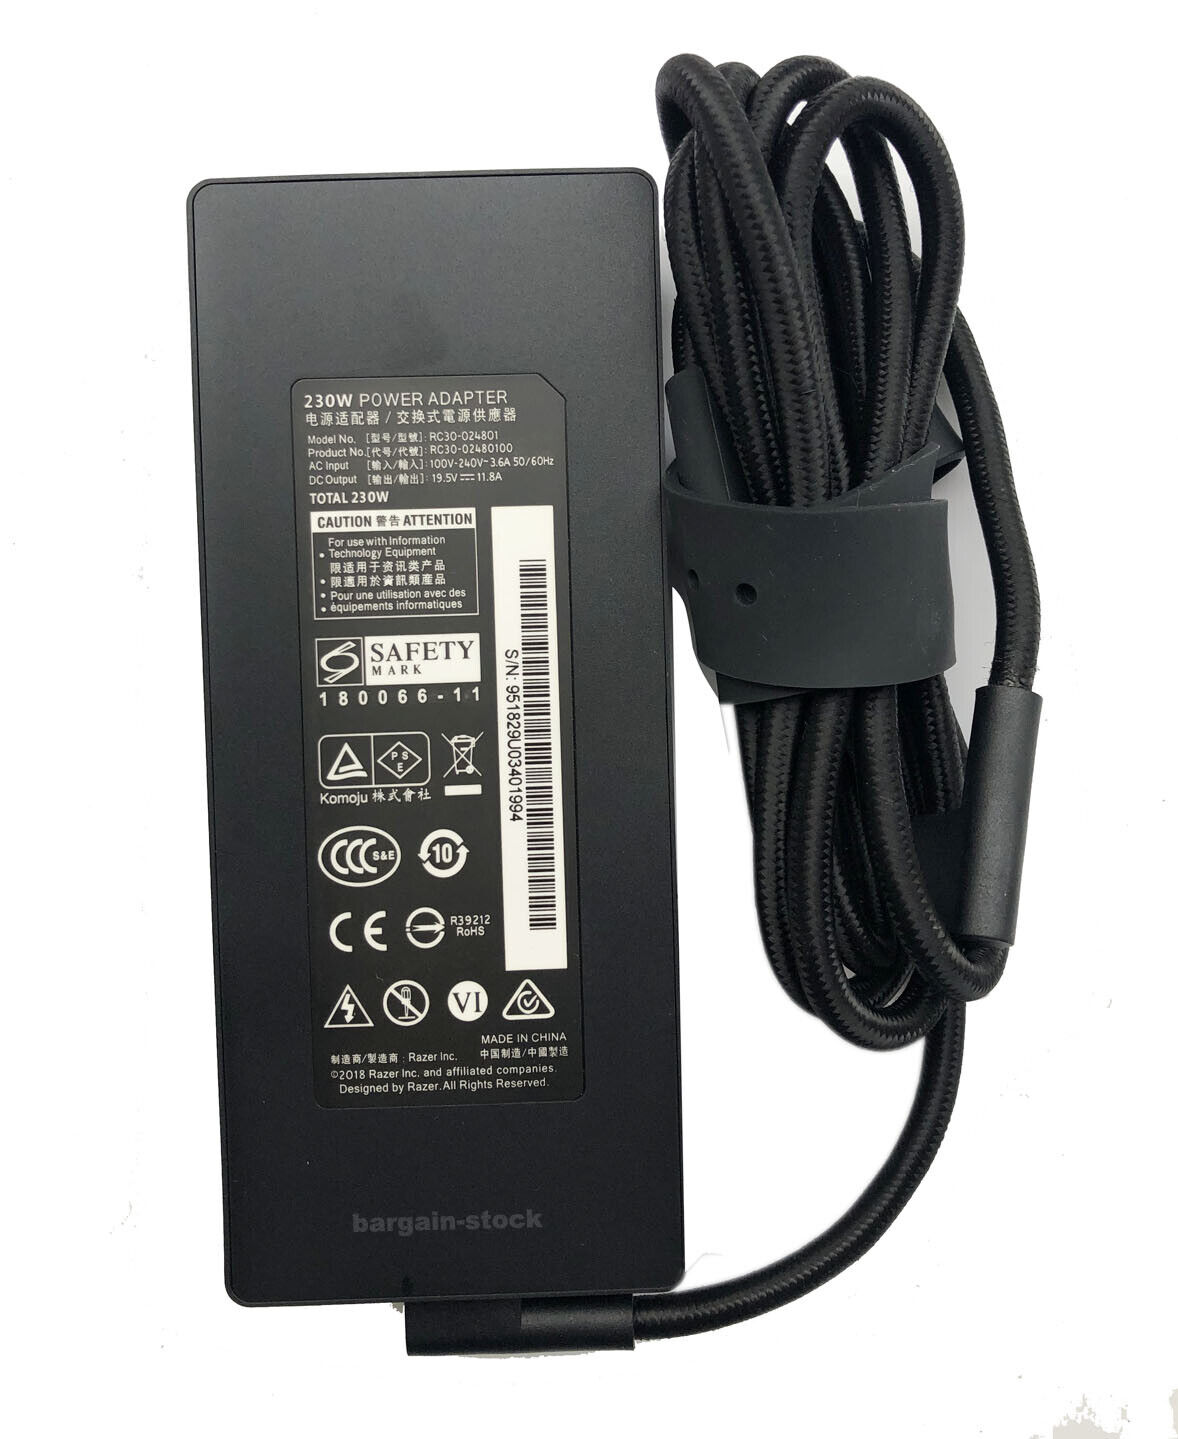 11.8A 230W AC Adapter Charger For Razer Blade 15 RZ09-0328 i7 RTX 2070 RC30-0248 Type AC & DC Compatible Brand For RAZE